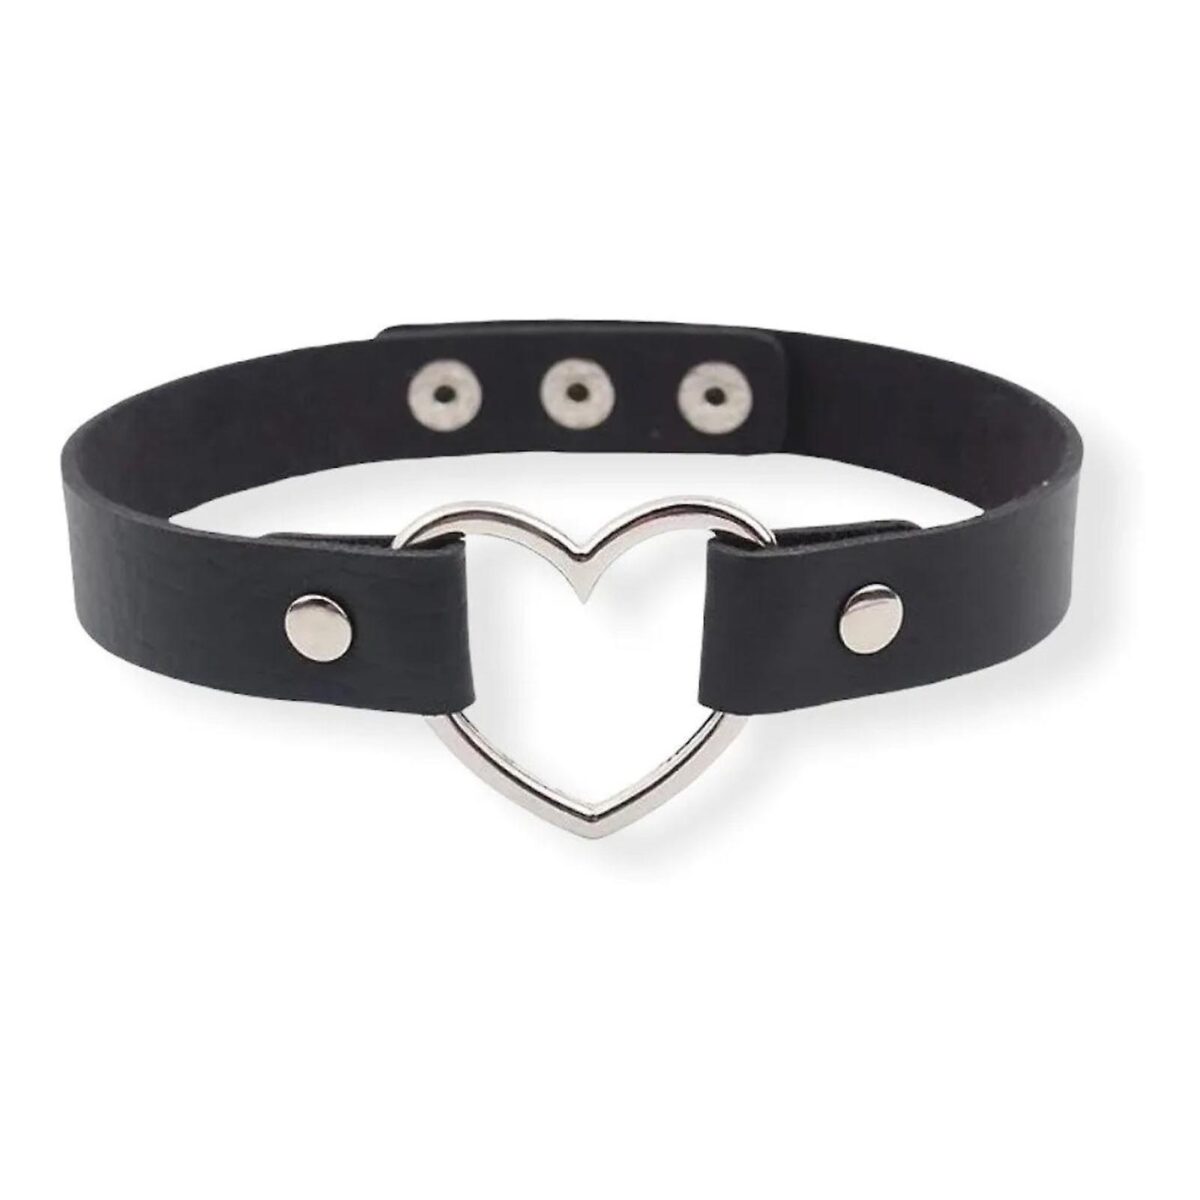 Heart Choker: Symbolism, Style, And Meaning | Comprehensive Guide